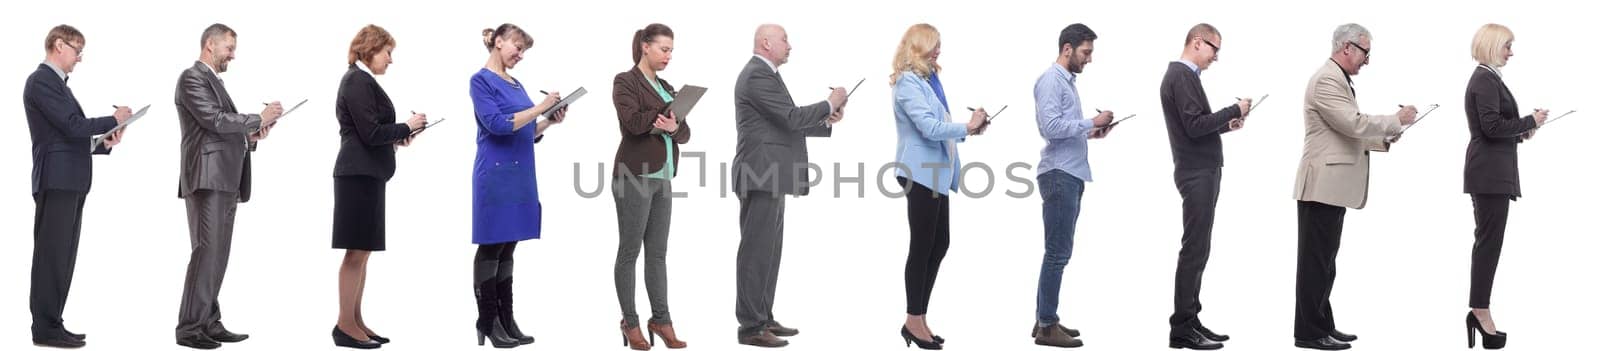 group of successful people with notepad in hands isolated by asdf